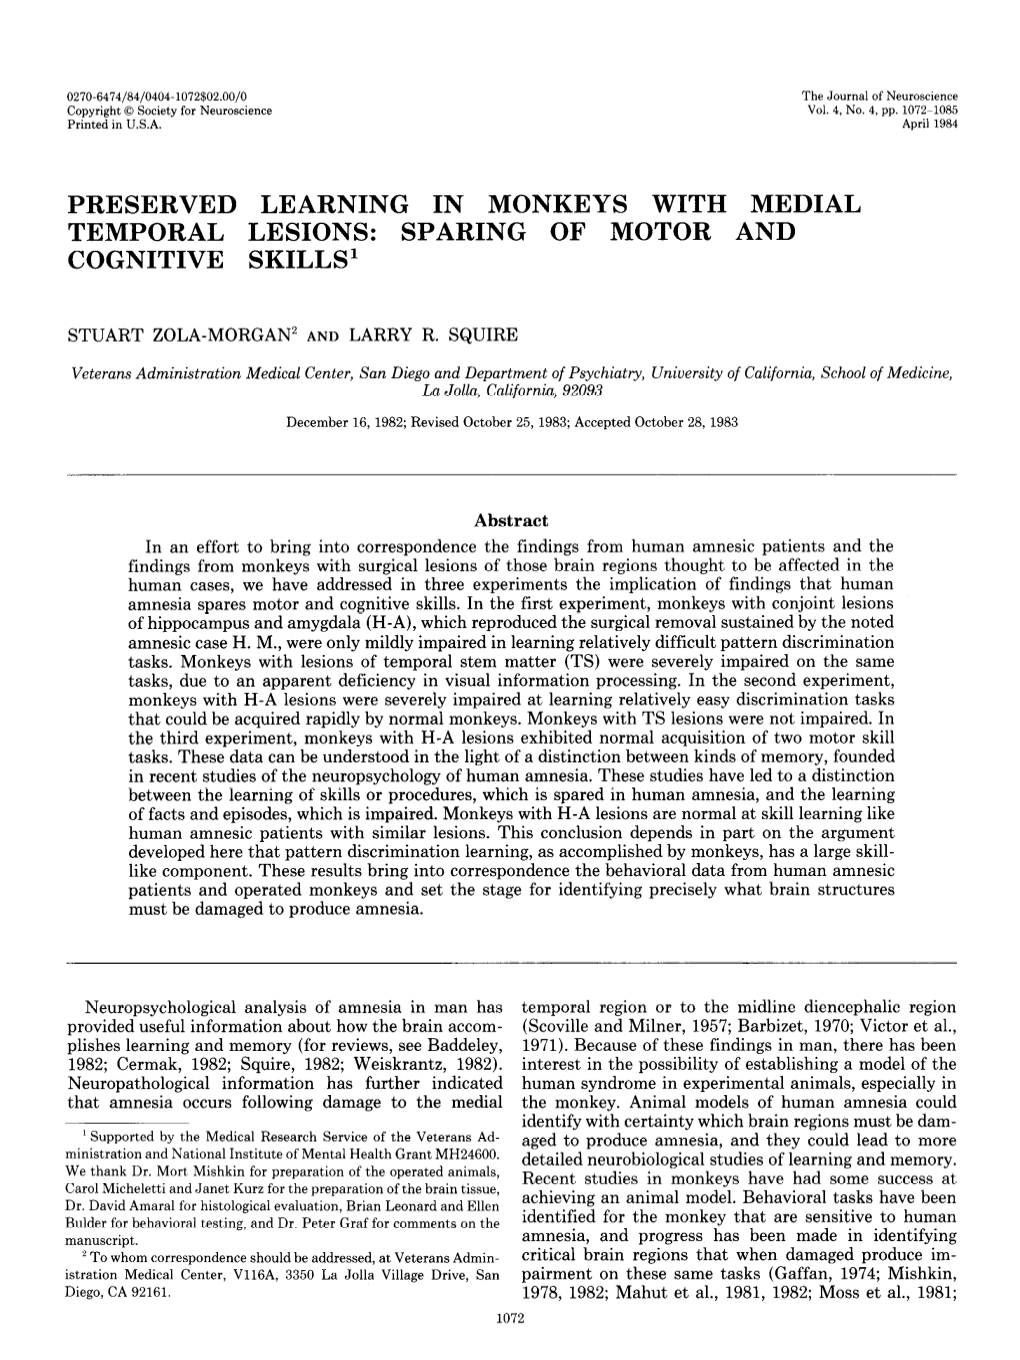 Preserved Learning in Monkeys with Medial Temporal Lesions: Sparing of Motor and Cognitive Skills’